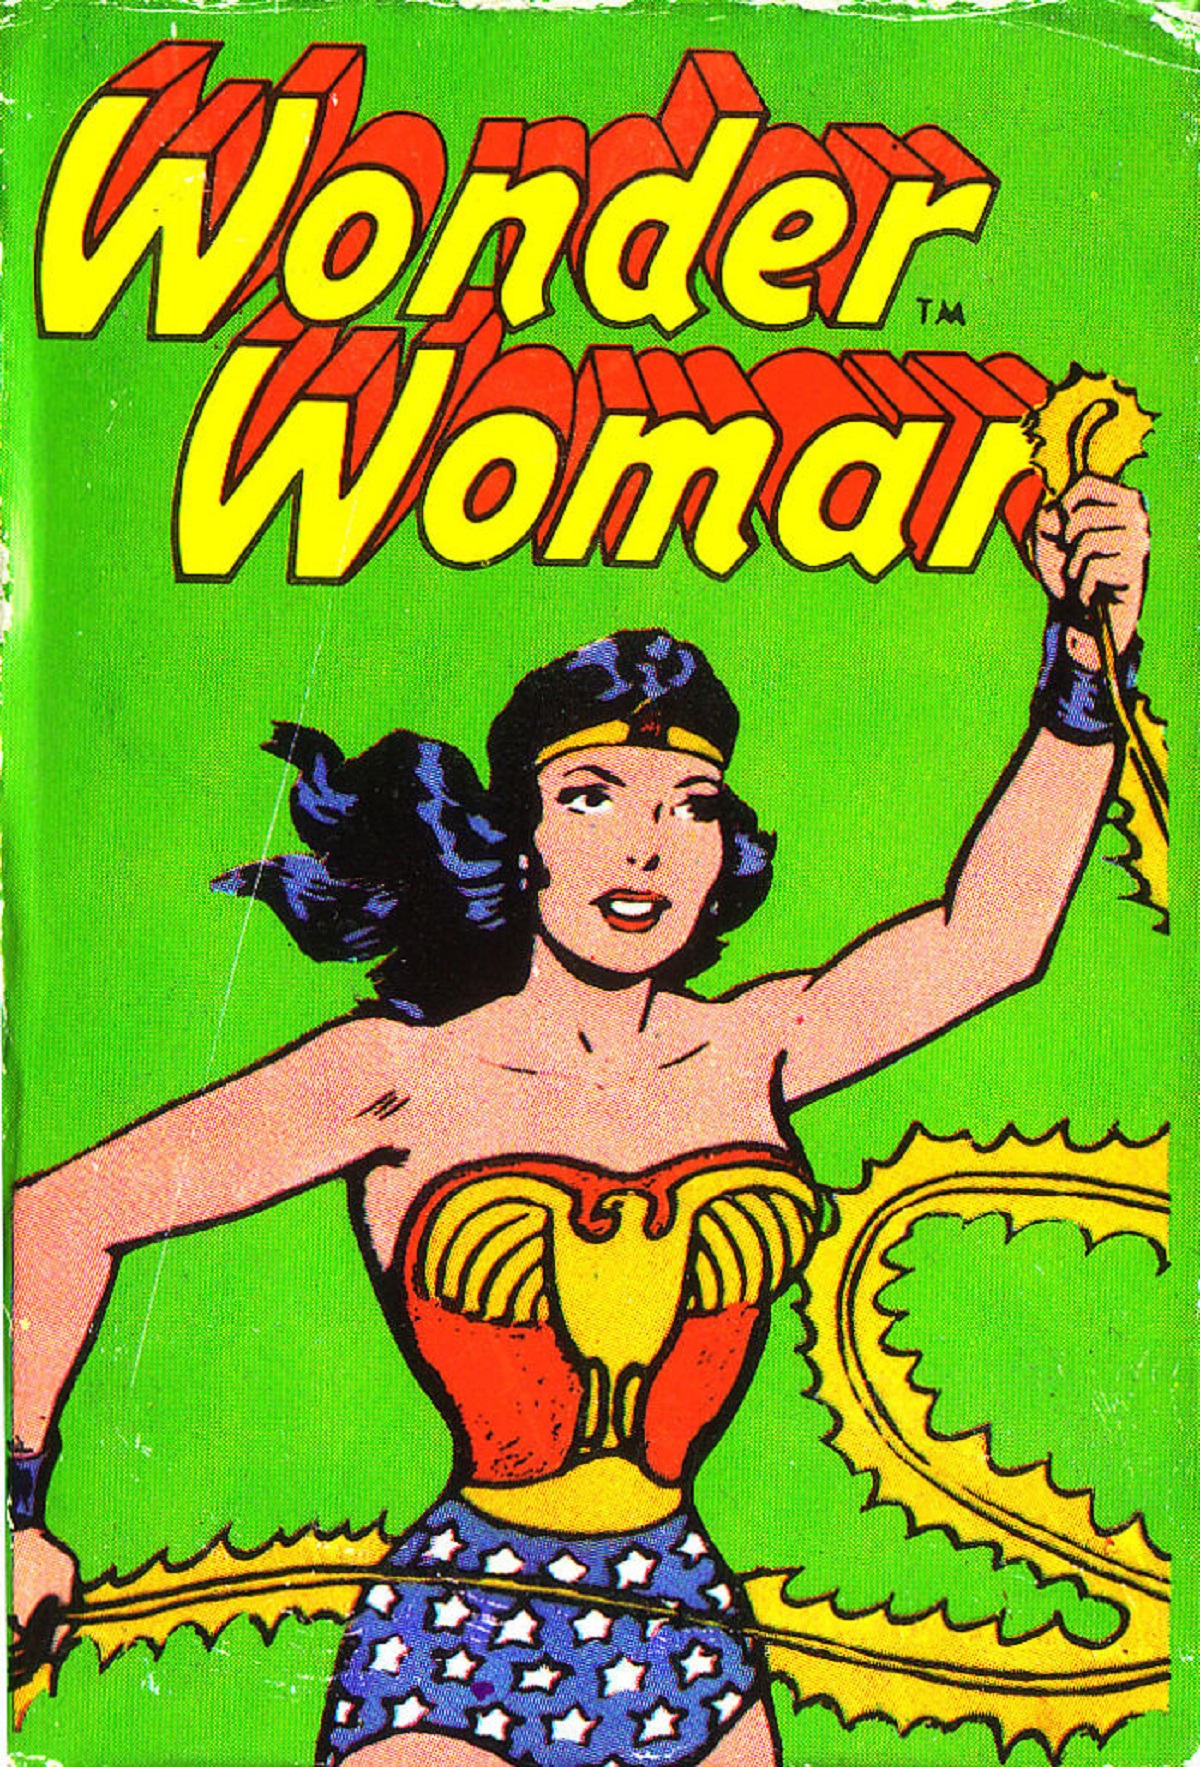 creator of Wonder Woman was in a thruple that involved his first wife and his student. They were heavily into bondage which inspired early iterations of the super heroine. Thruple lasted 22 years all the way to his death